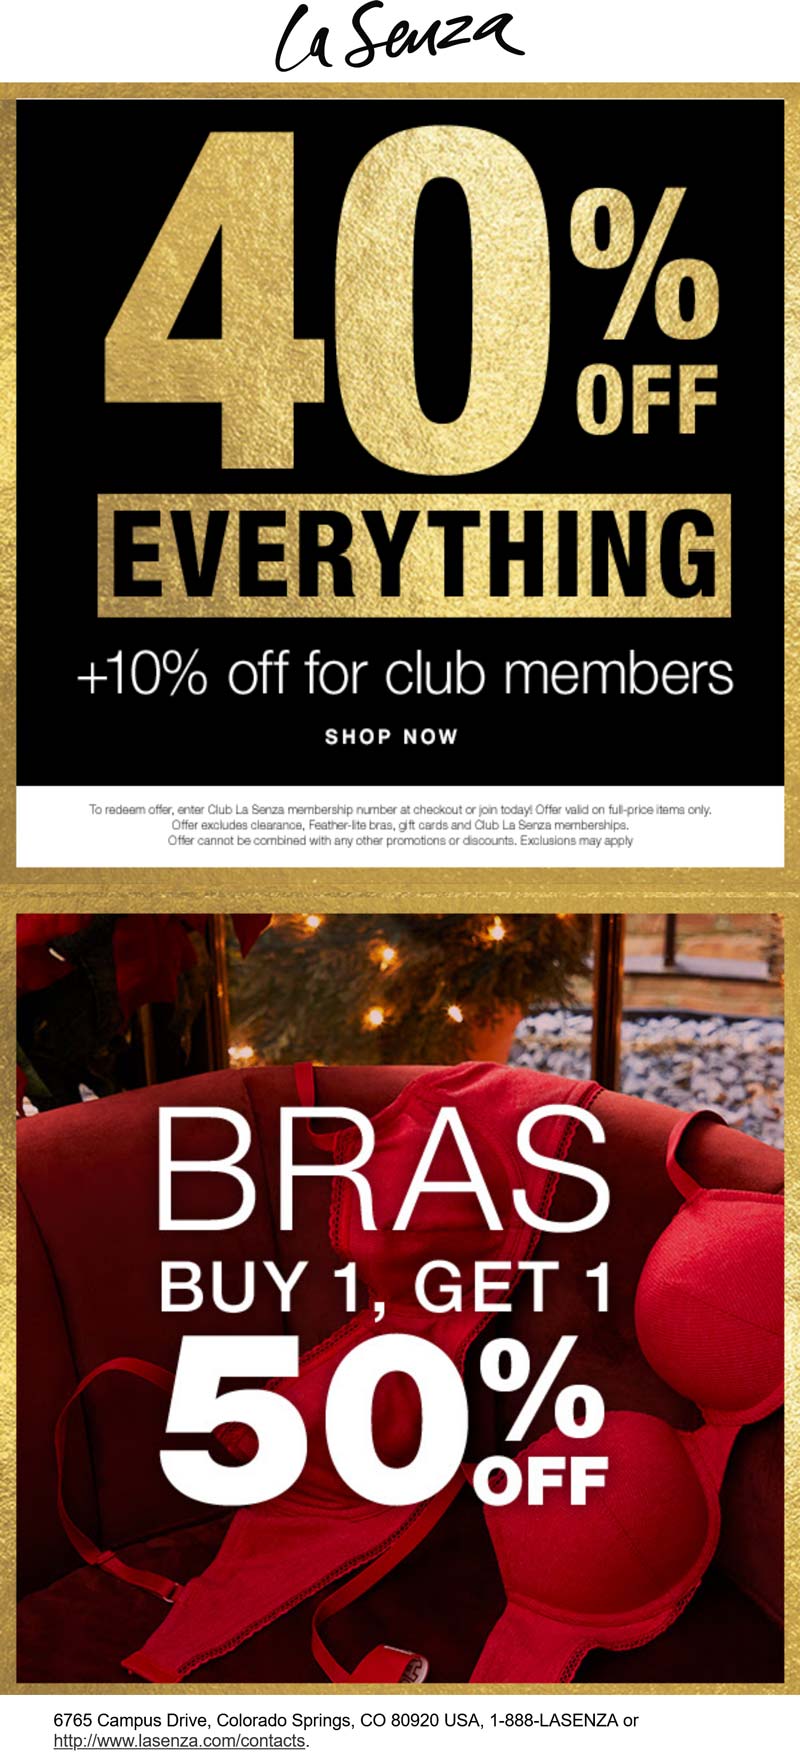 40-50% off everything + second bra 50% off at La Senza #lasenza